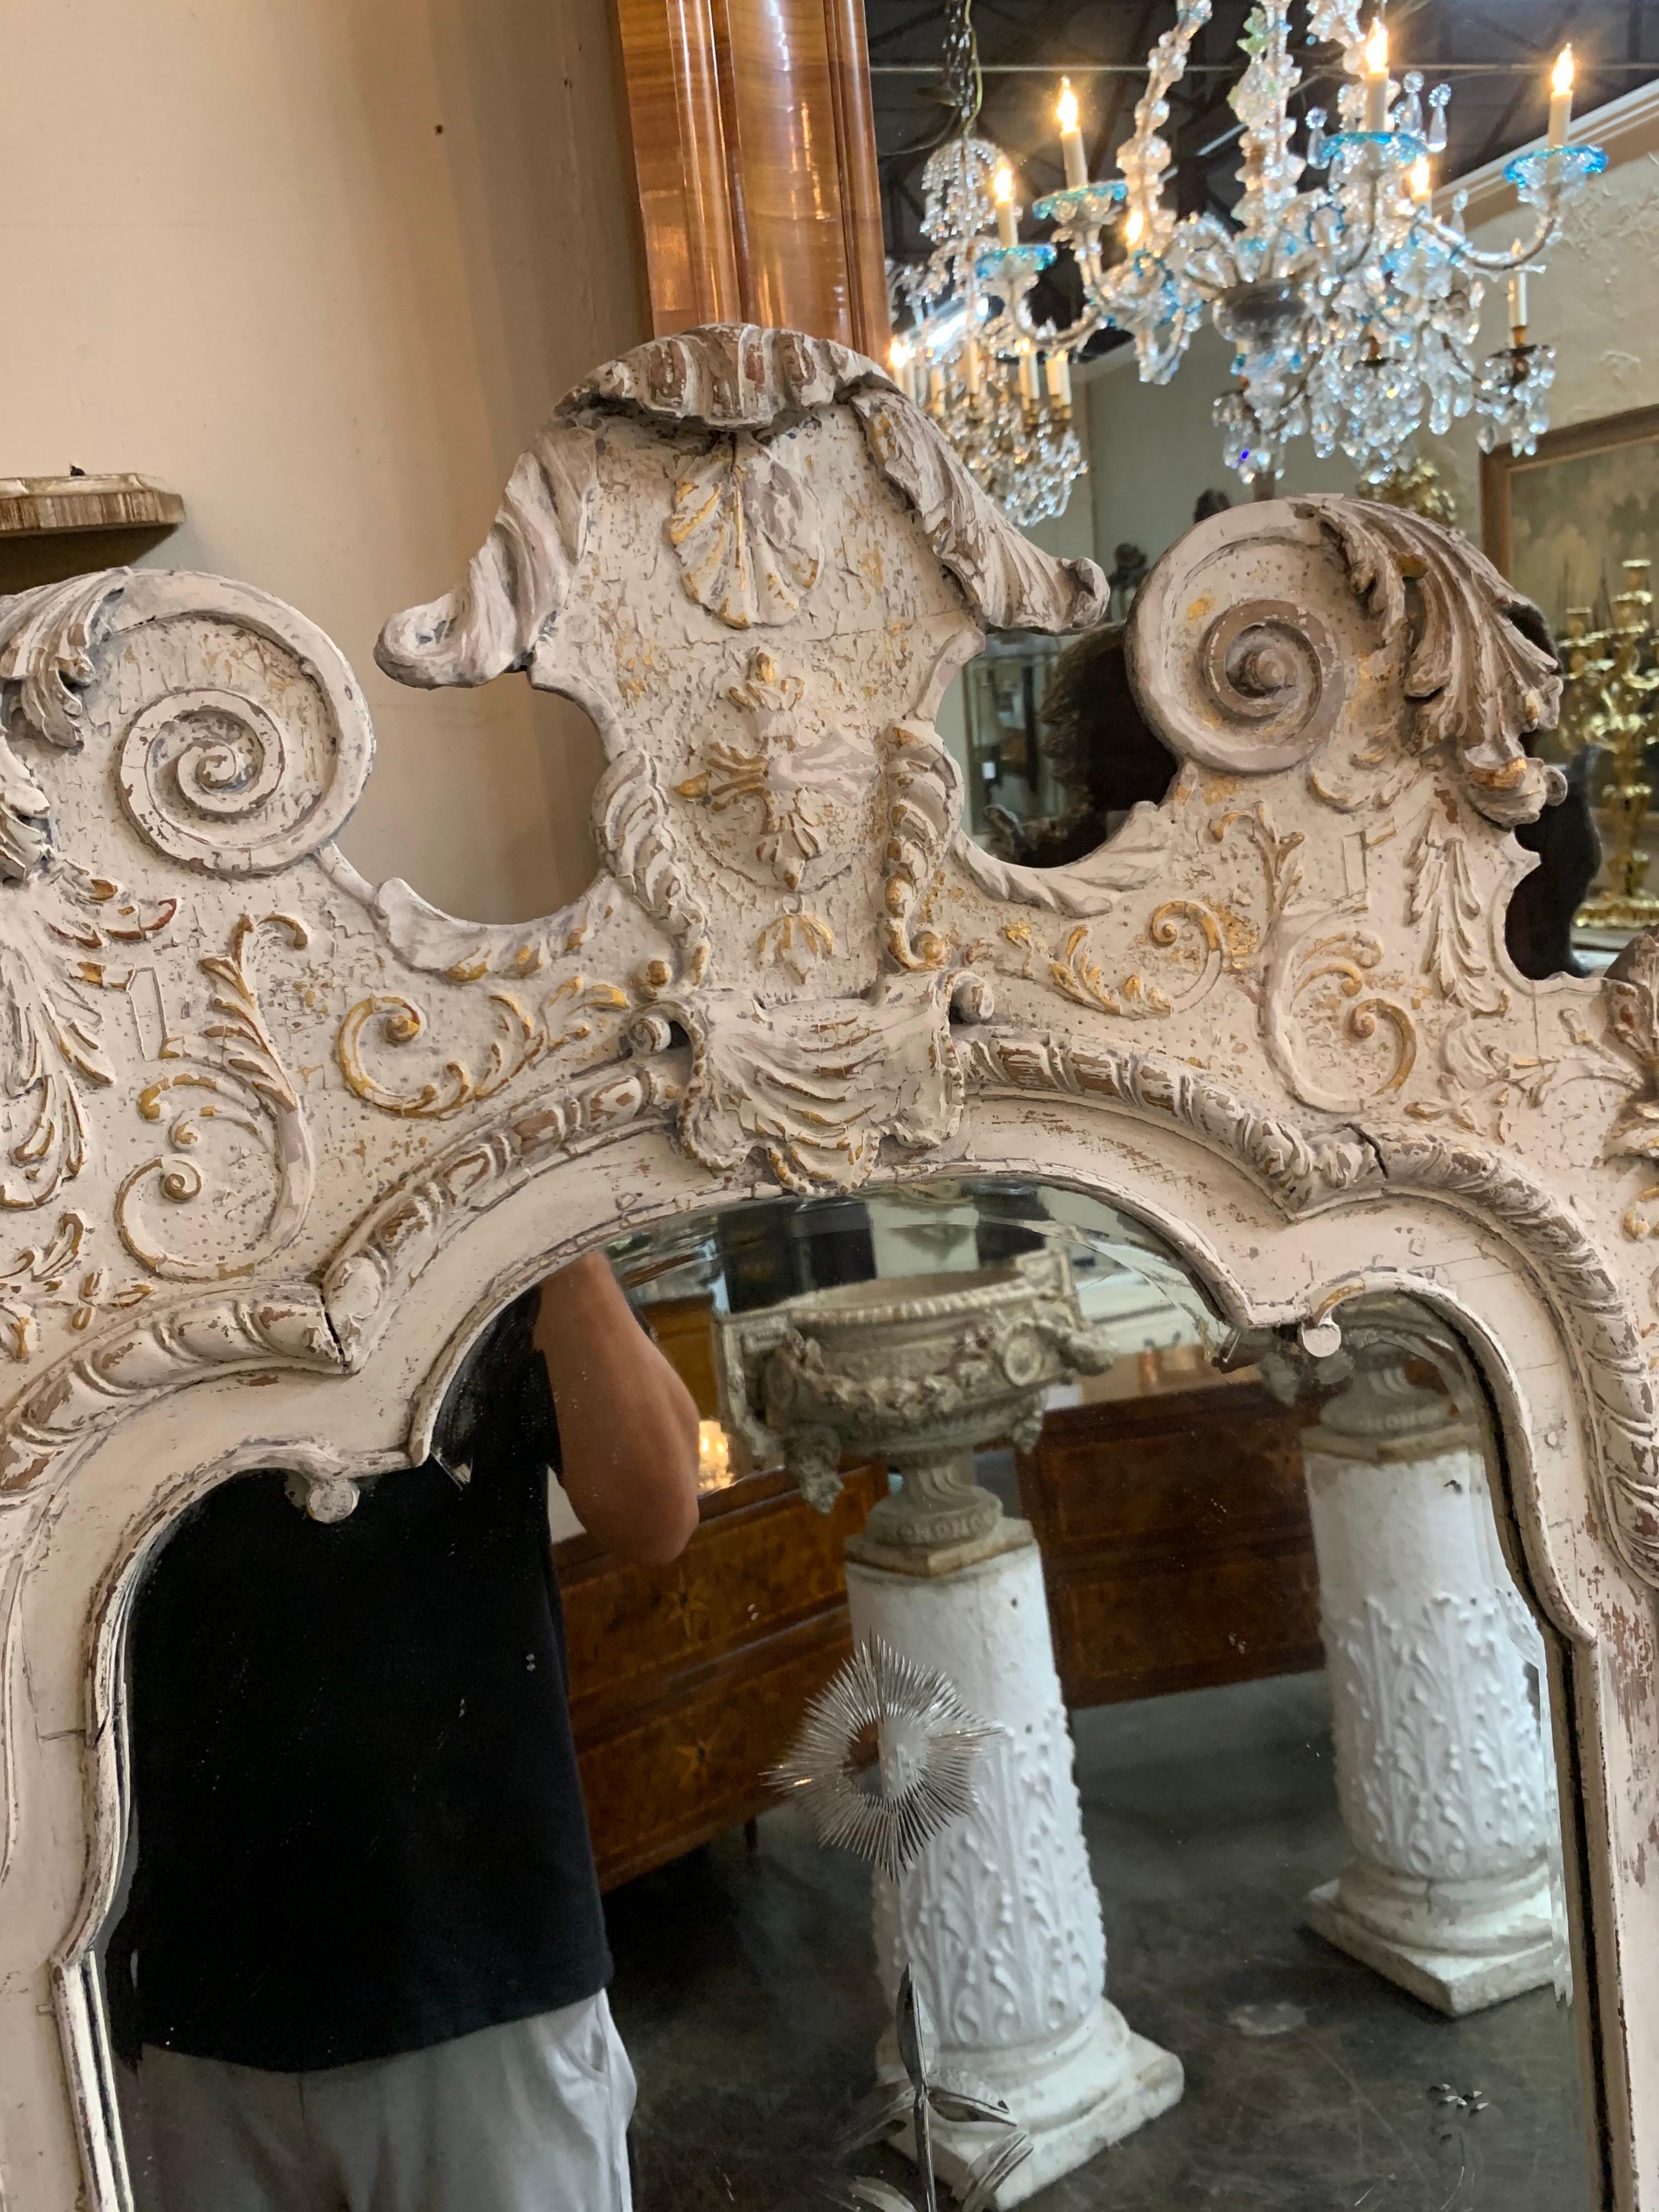 Gorgeous pair of period English Regency carved and painted mirrors with original divided glass. Beautiful carvings and lovely patina on these. Exquisite! Note: Price listed is per item.